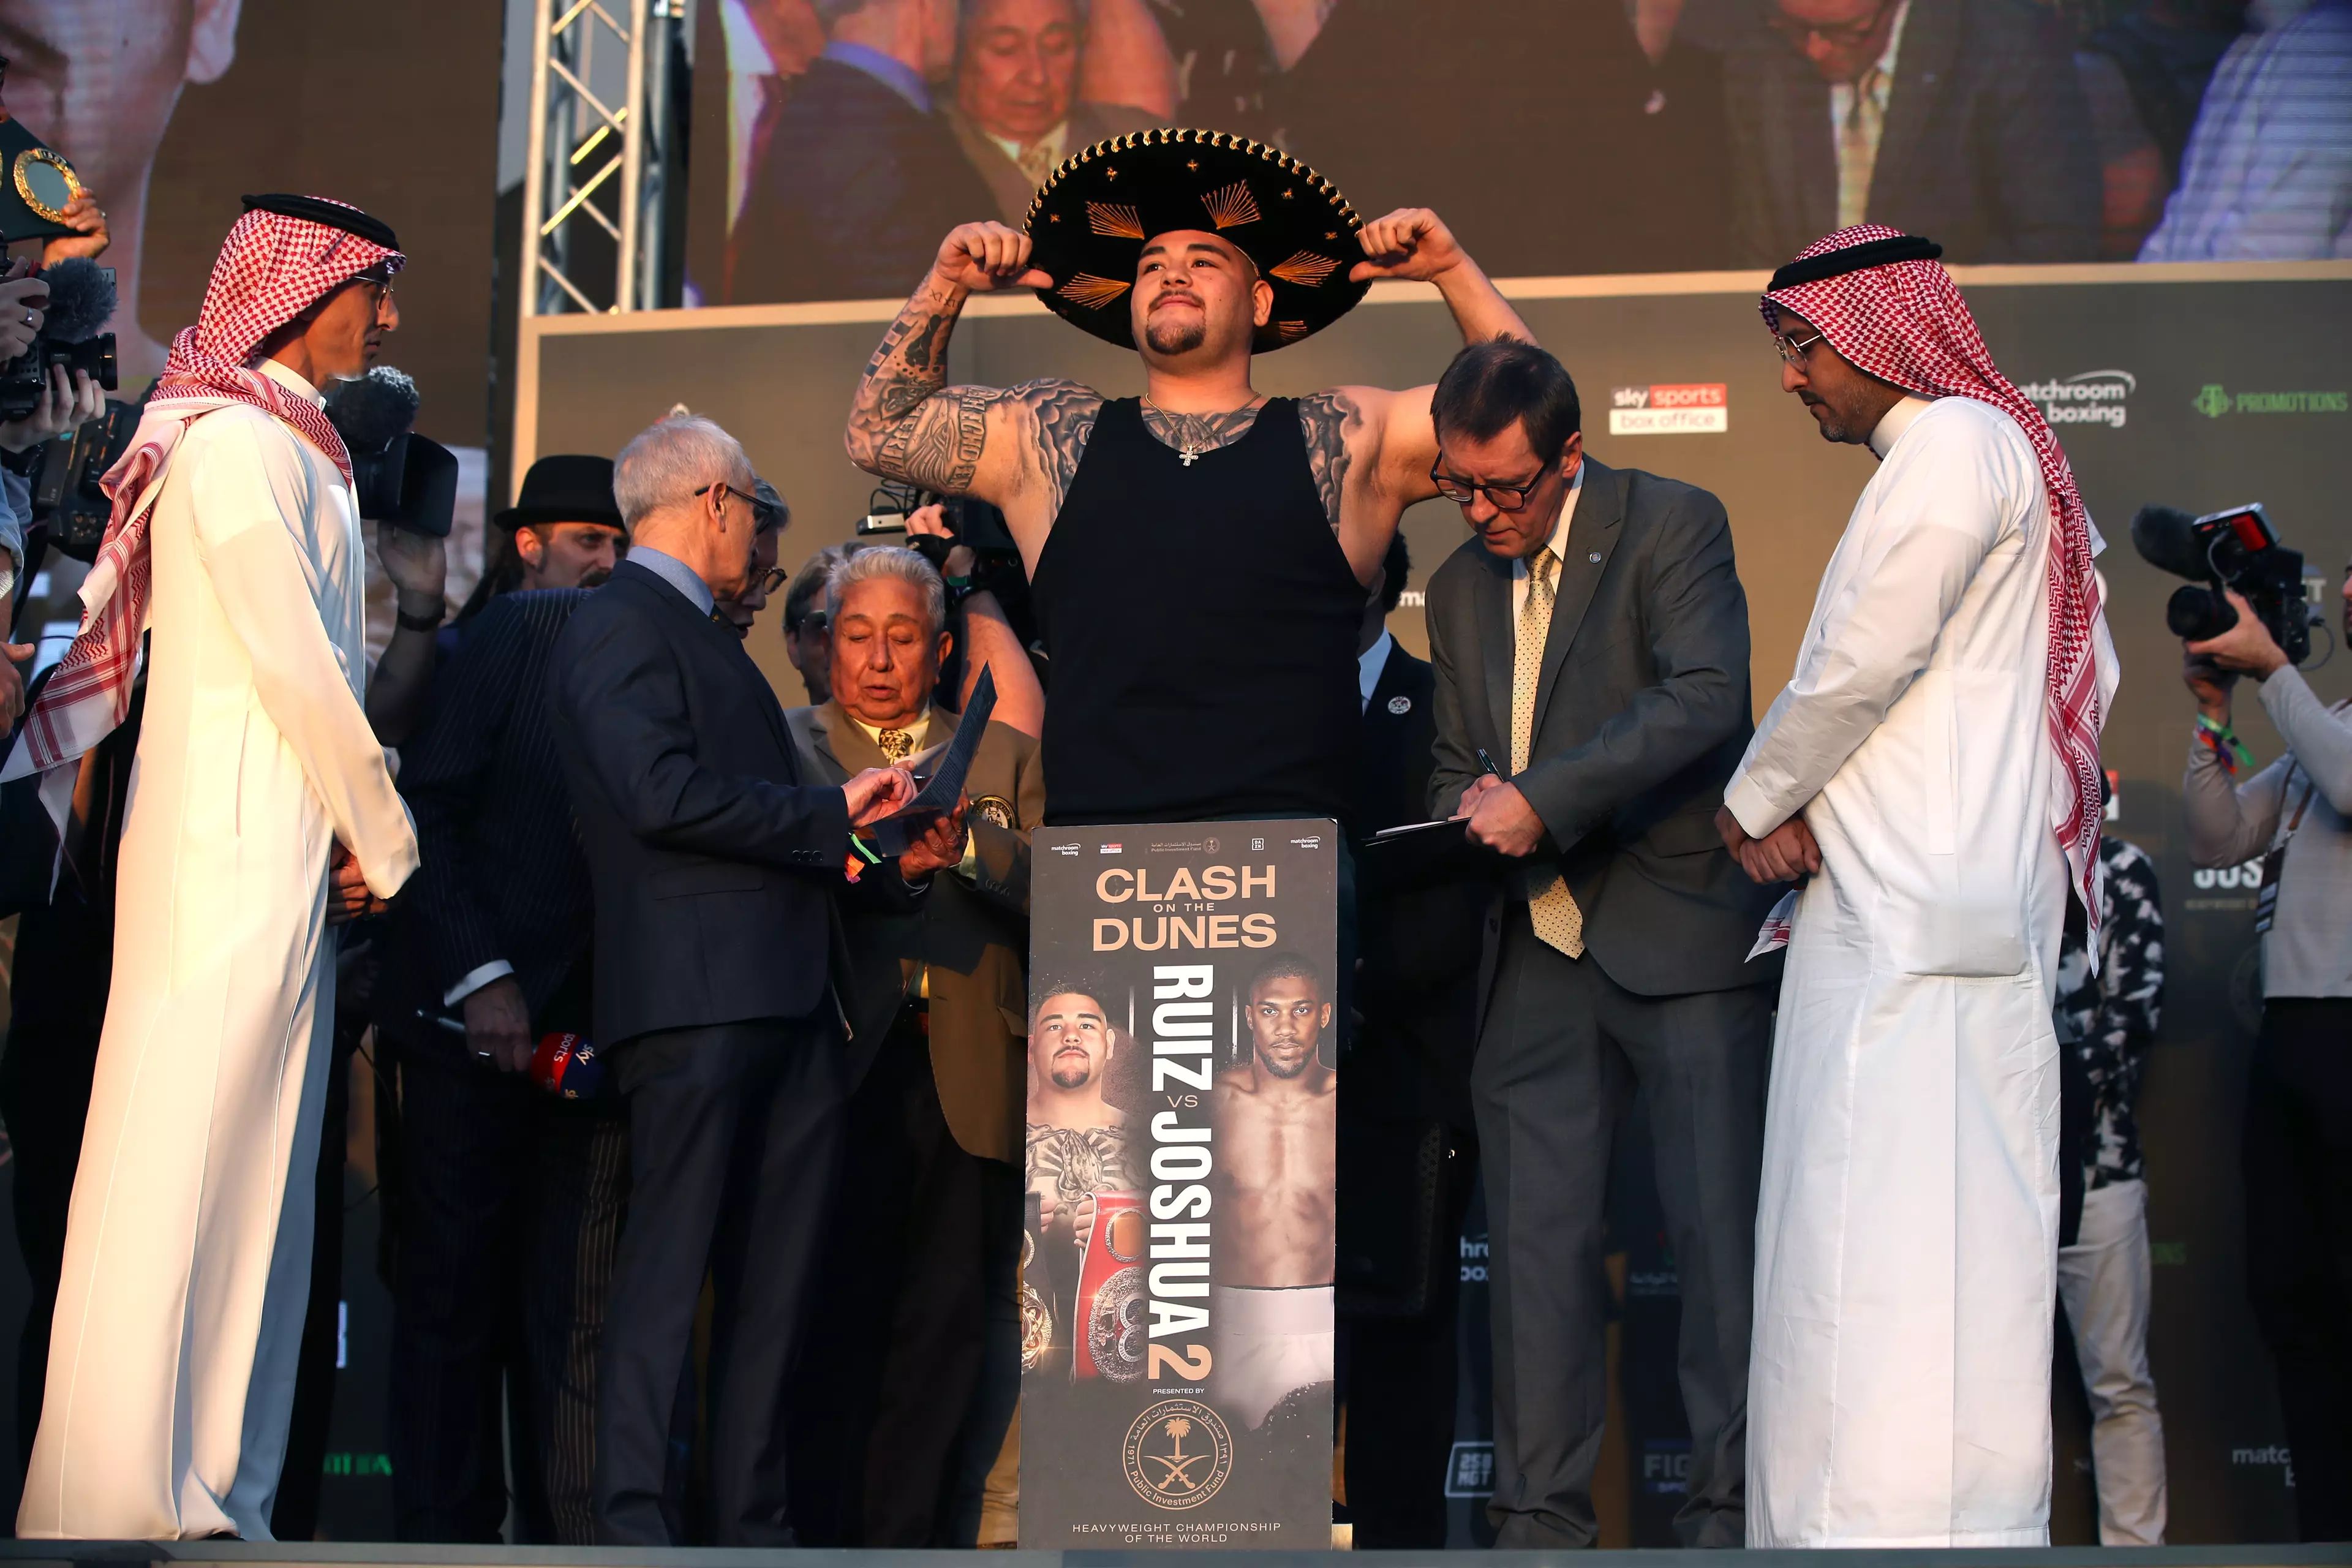 Ruiz wore a sombrero and vest to cover up his weight gain. Image: PA Images